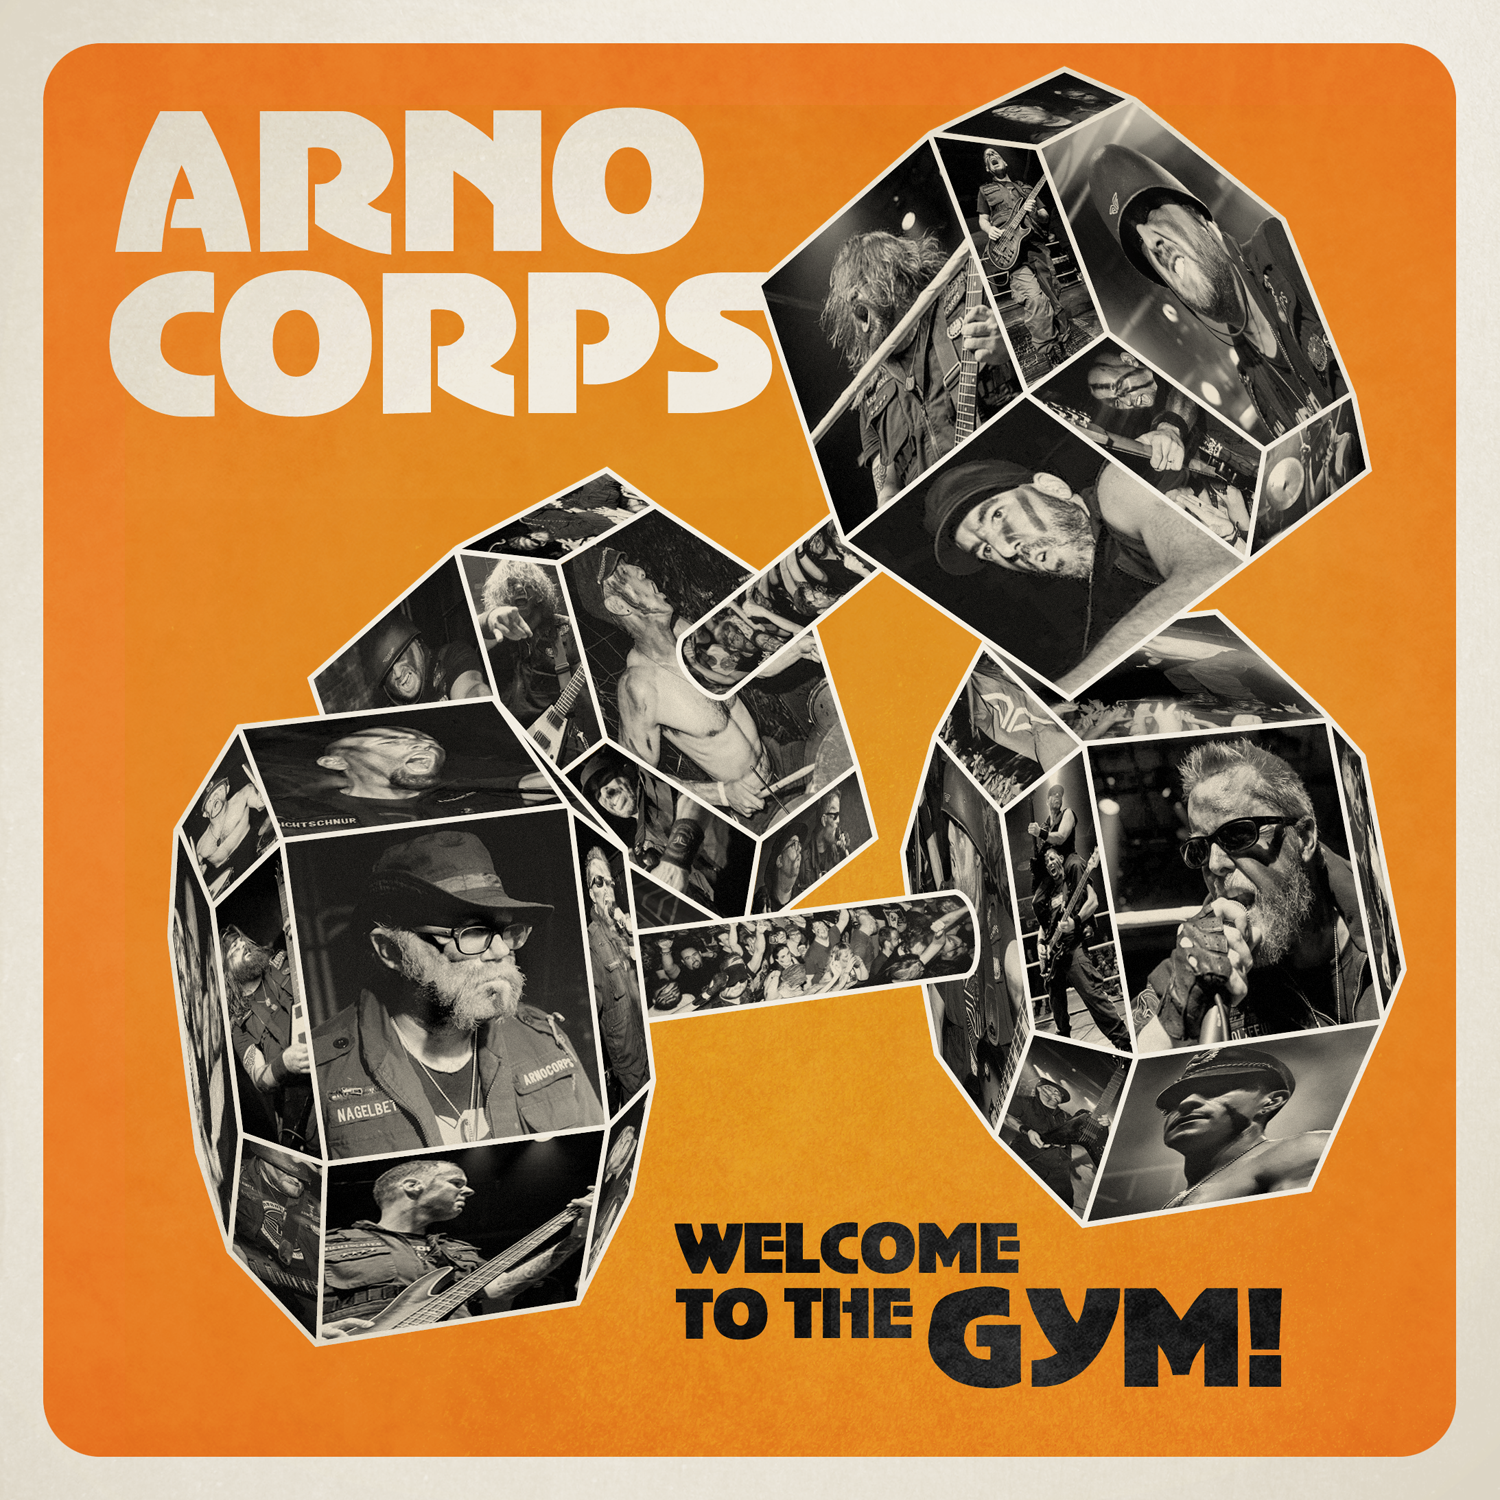 ARNOCORPS "WELCOME TO THE GYM!" DIGITAL RELEASE THIS FRIDAY